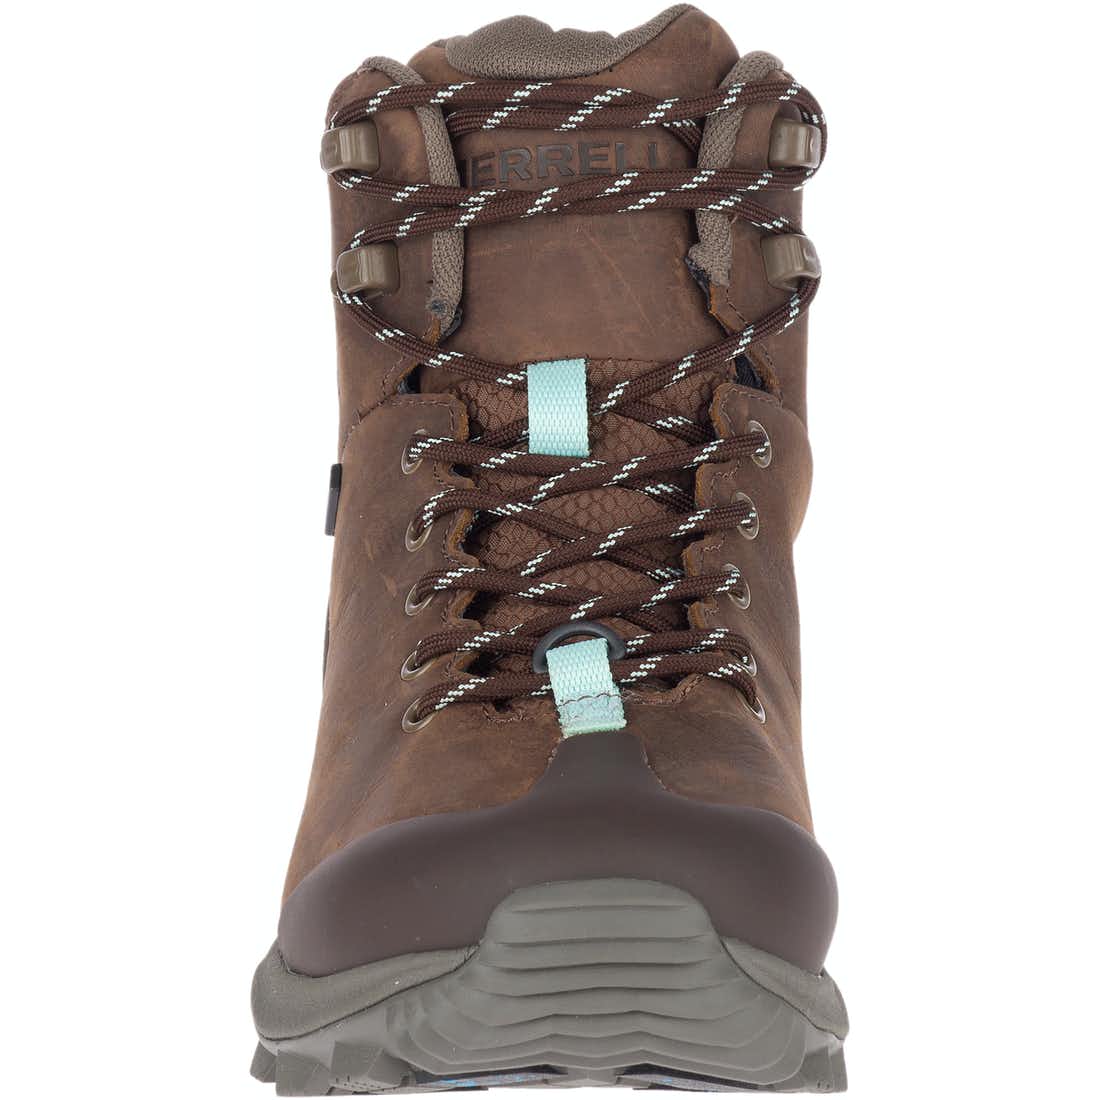 Merrell Women's Thermo Glacier Mid Waterproof Boots Earth